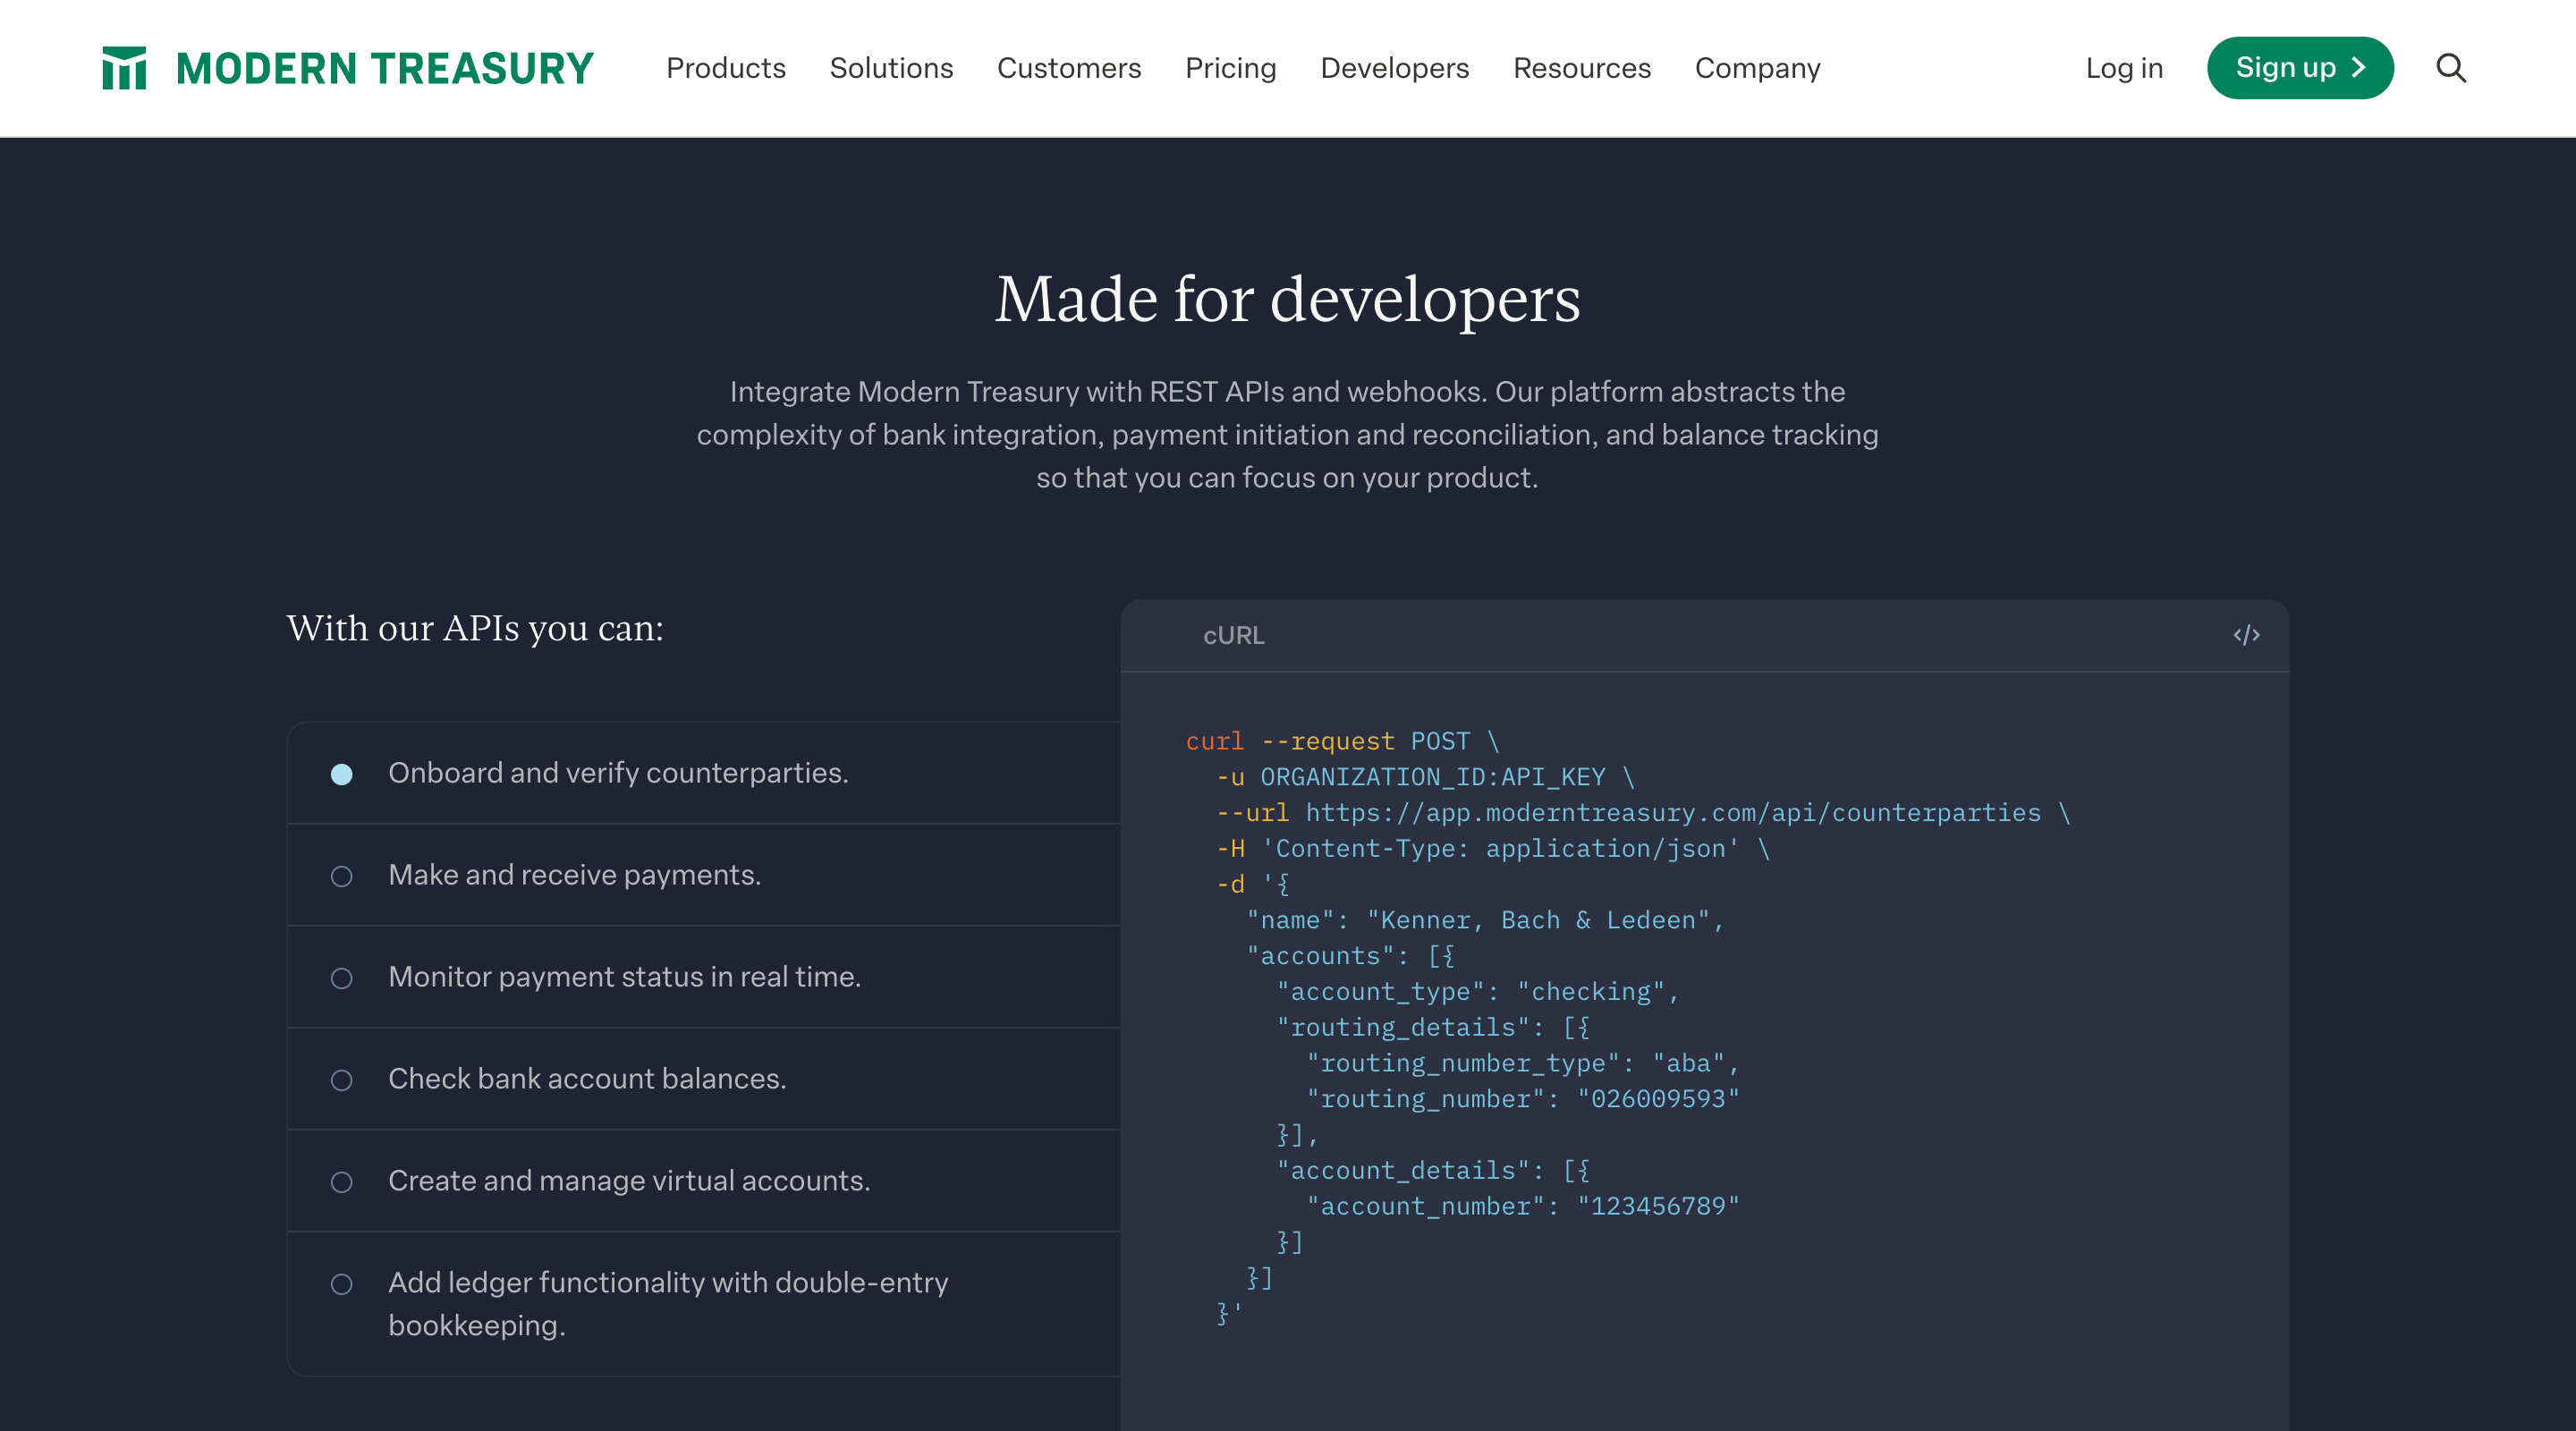 Screenshot of the 'Made for developers' section of the Modern Treasury home page. After an introduction paragraph the section lists the features of the Modern Treasury API on the left of the screen. On the right is an example cURL command which can be used to make an API request.